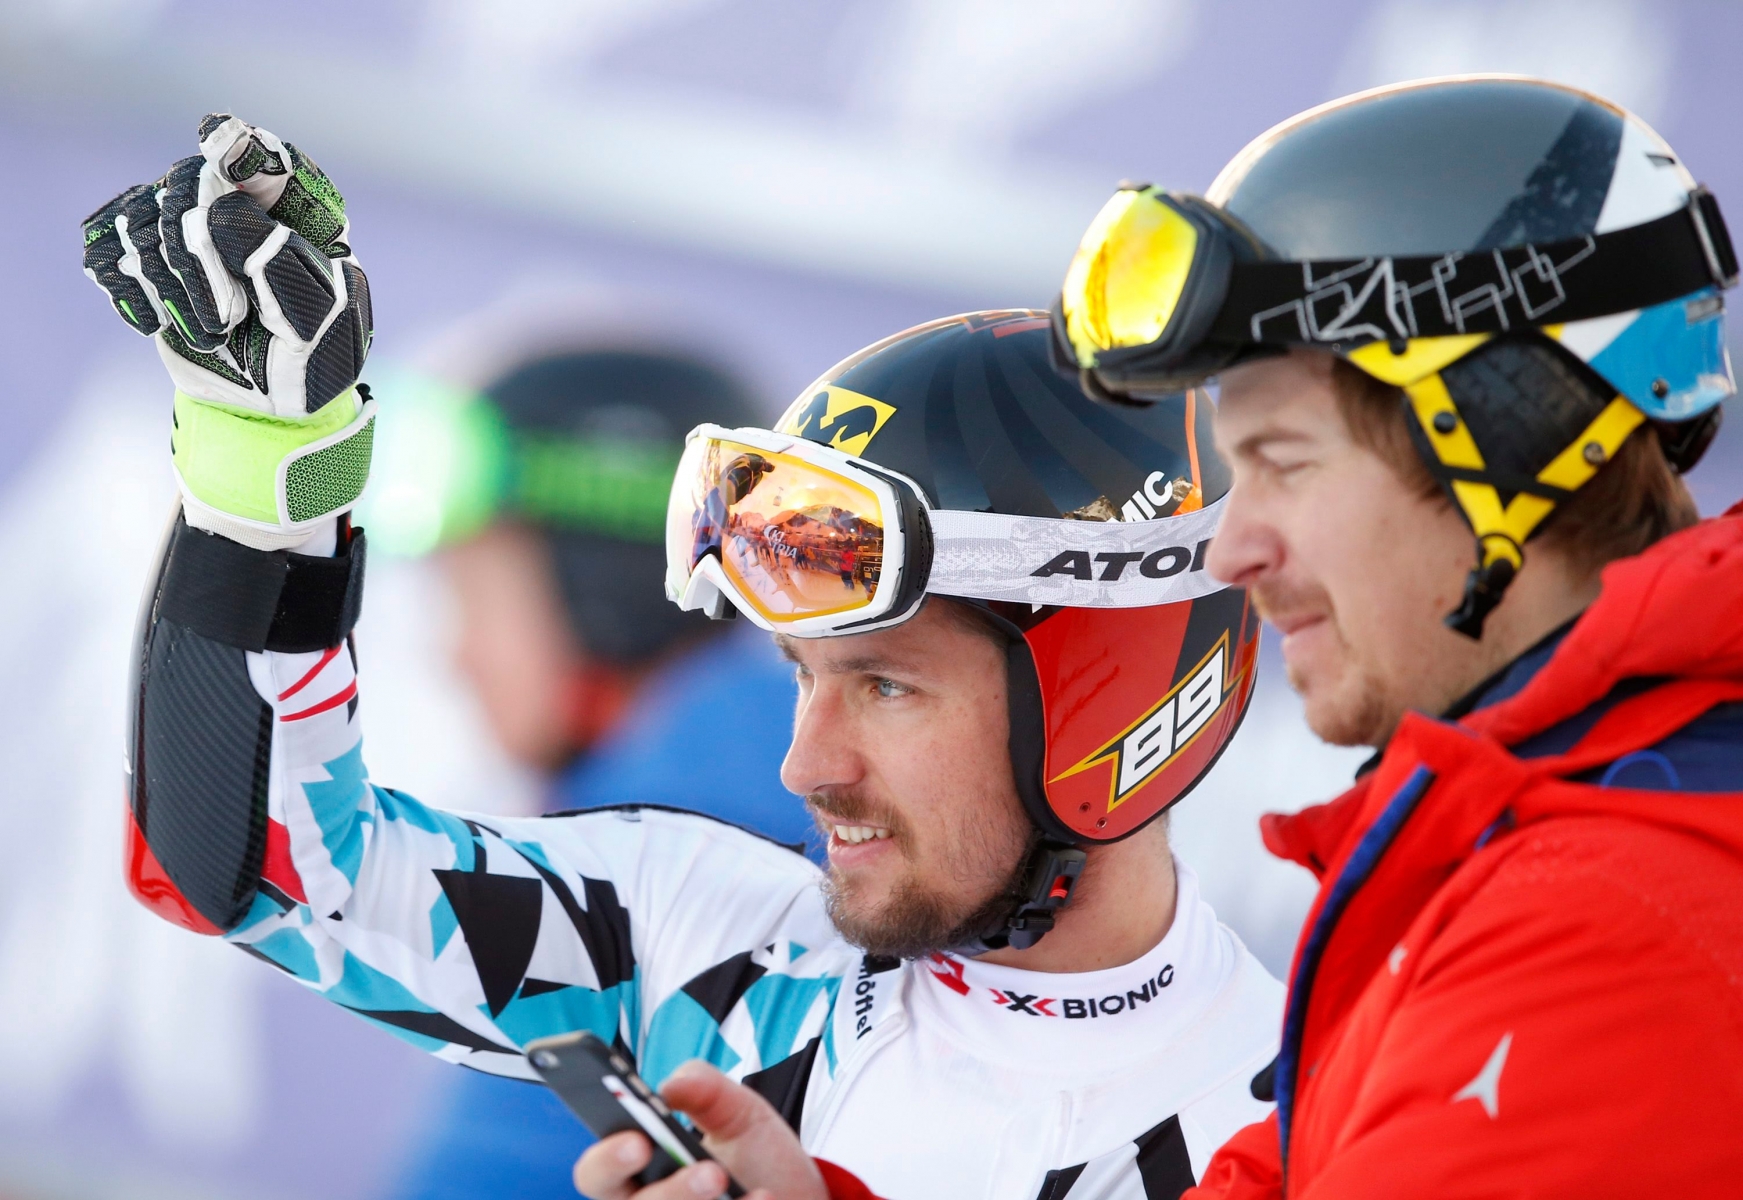 epa05667042 Marcel Hirscher (L) of Austria during the men's Giant Slalom training at the FIS Alpine Skiing World Cup in Val D'Isere, France, 09 December 2016.  EPA/GUILLAUME HORCAJUELO FRANCE ALPINE SKIING WORLD CUP